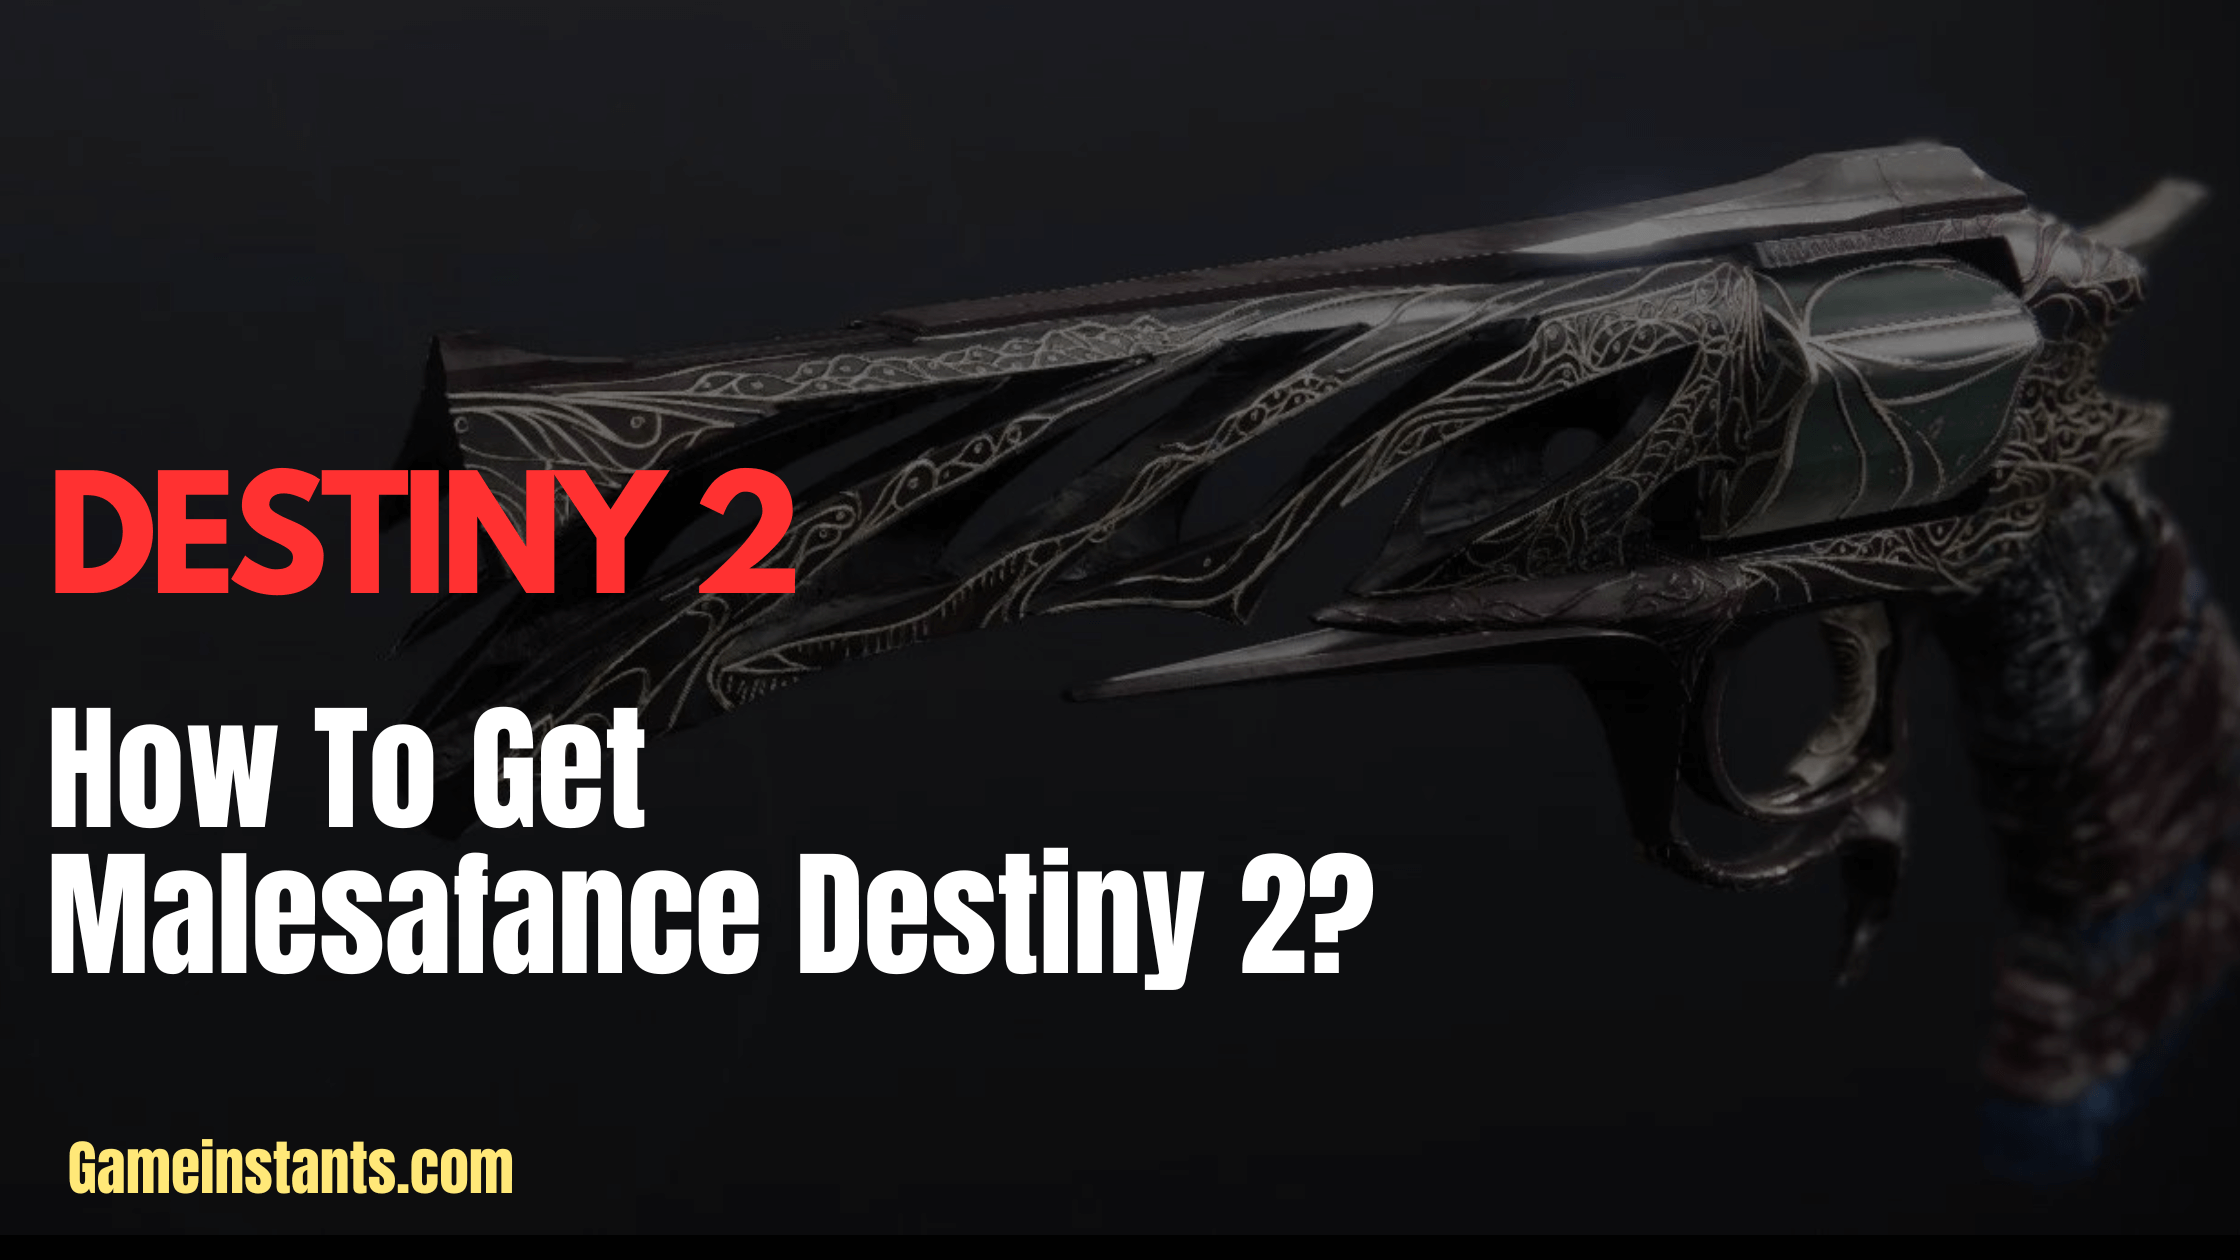 How To Get Malesafance Destiny 2